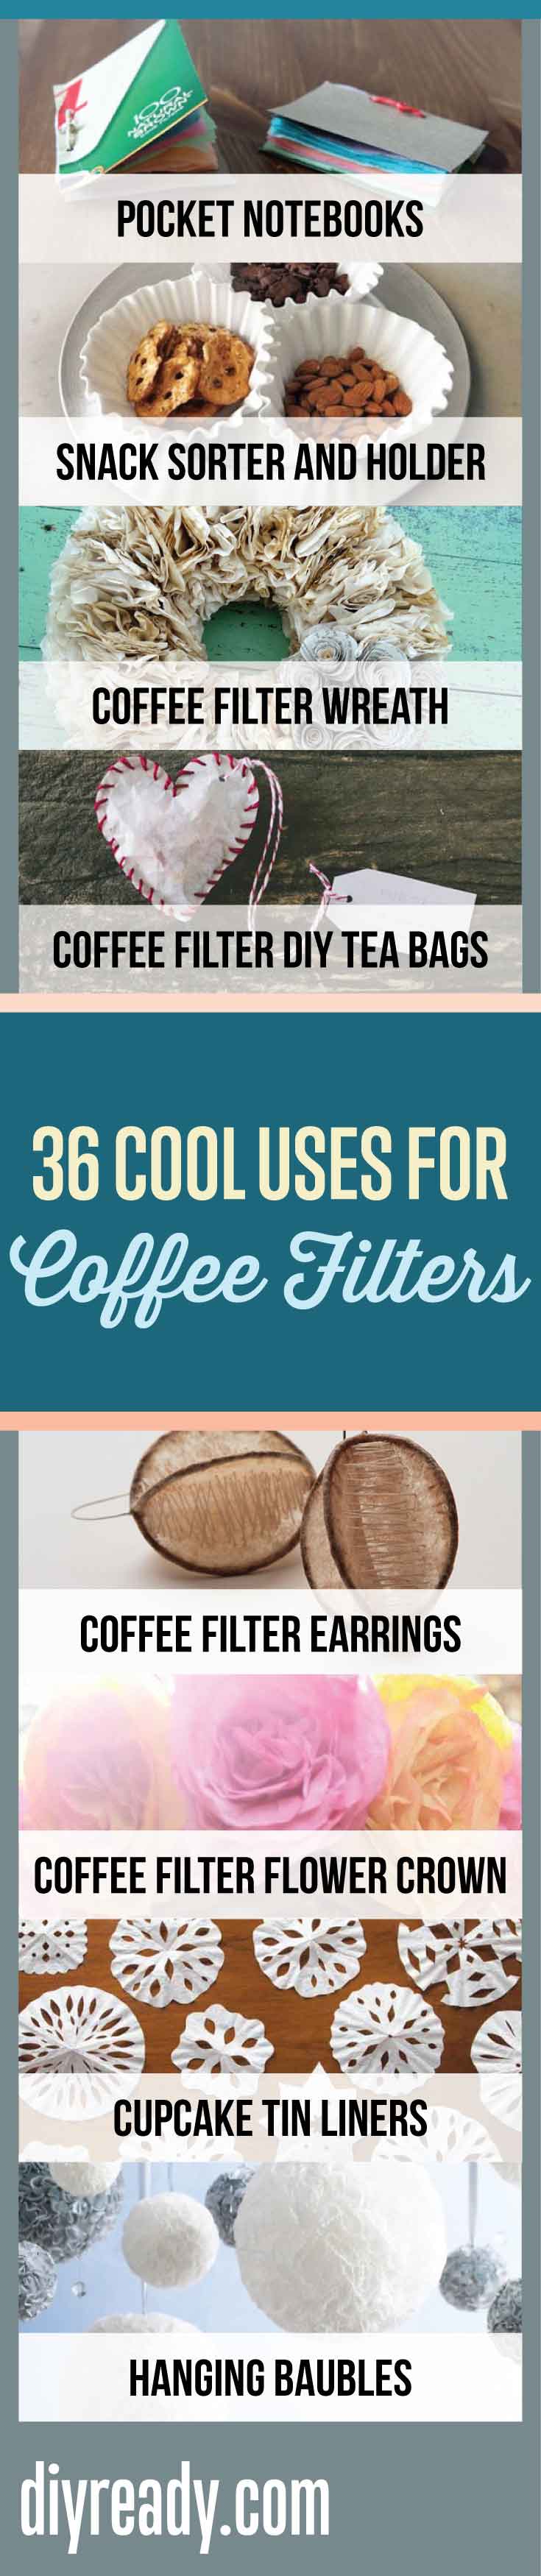 Uses for Coffee Filters | DIY Projects and Crafts by DIY Projects at https://diyprojects.com/uses-for-coffee-filters-diy-projects-and-ideas